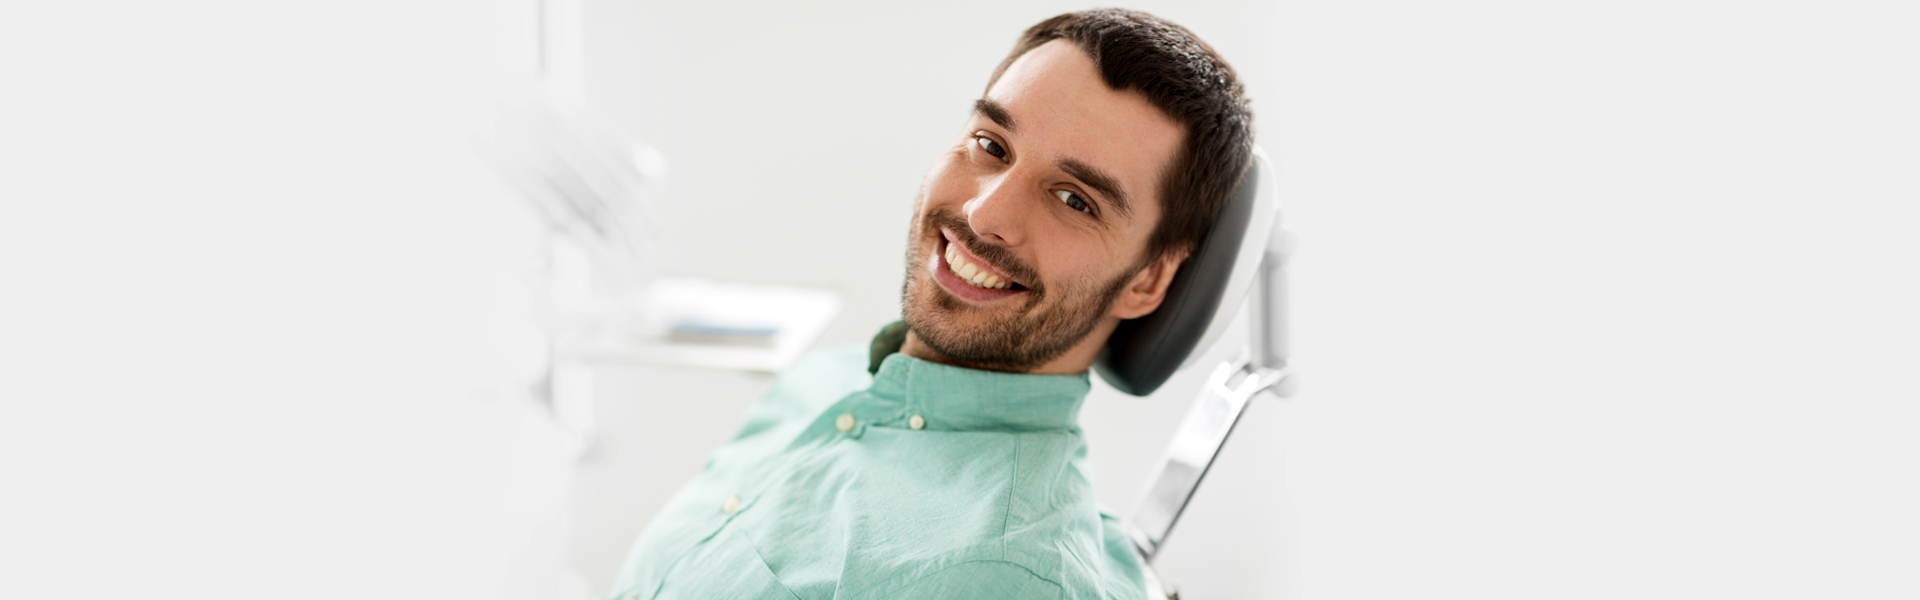 Root canal Treatment in St. Pete beach